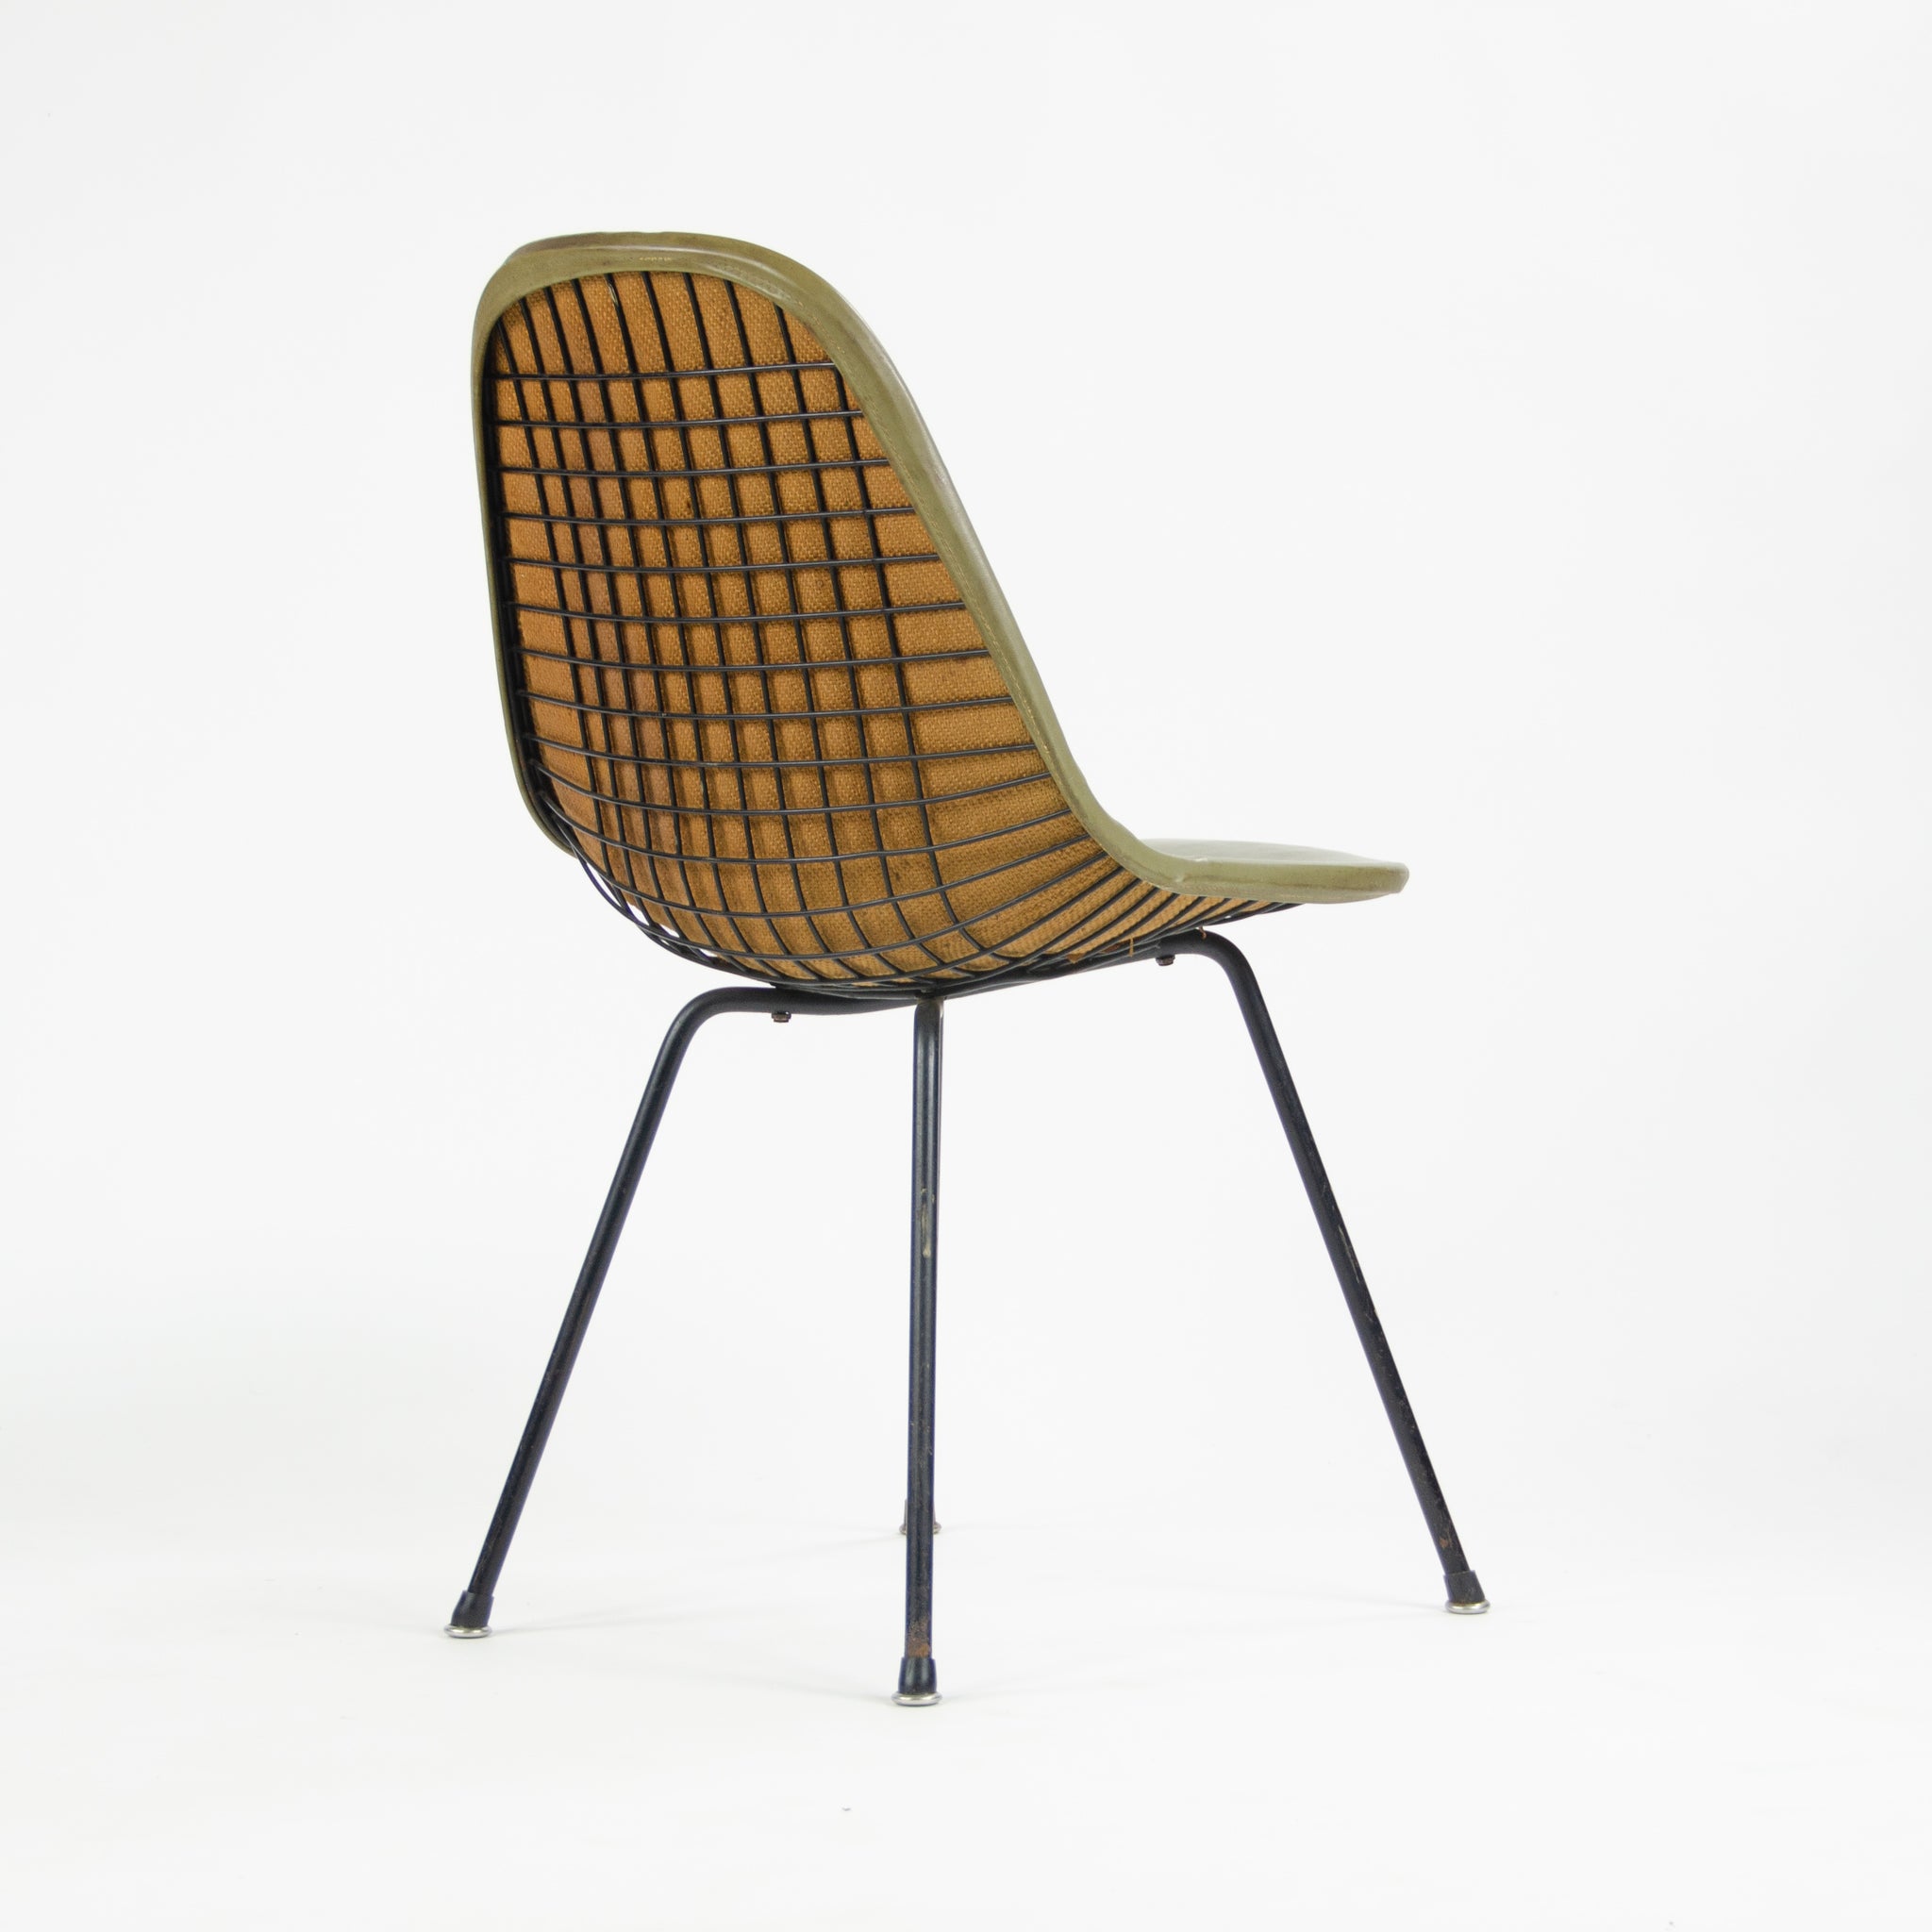 SOLD 1954 Herman Miller Eames Wire Shell Chair Green X Base DKX-1 All Original Venice Label